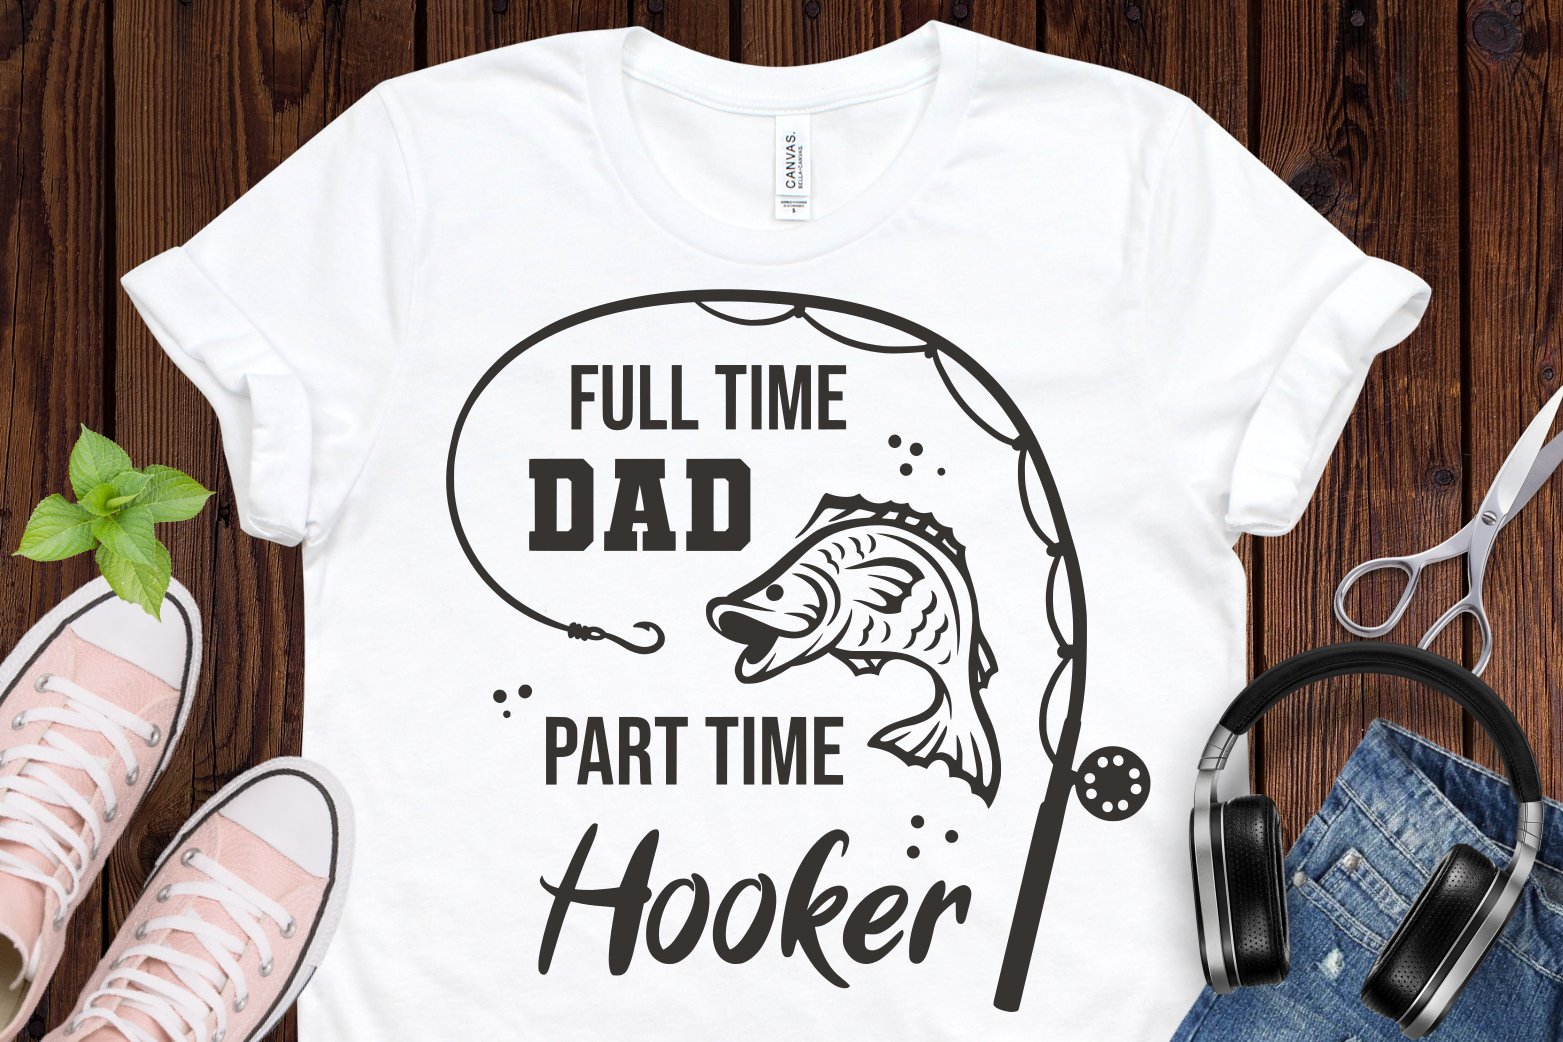 Classic white t-shirt with fish illustration and phrase.